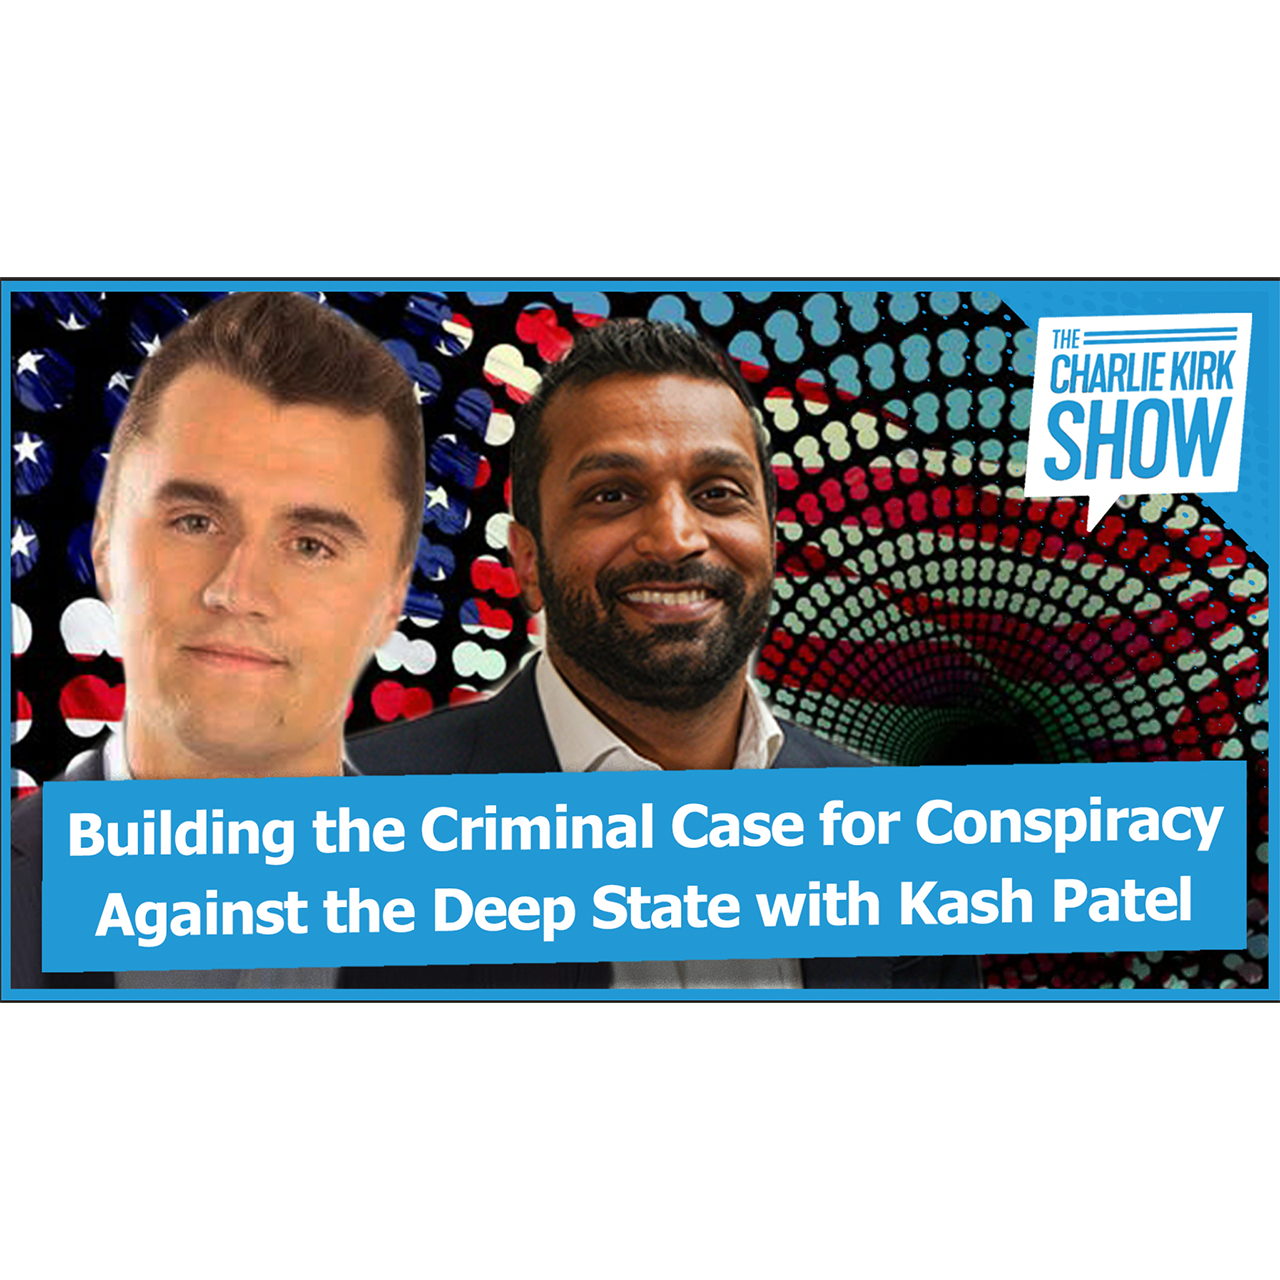 Building the Criminal Case for Conspiracy Against the Deep State with Kash Patel